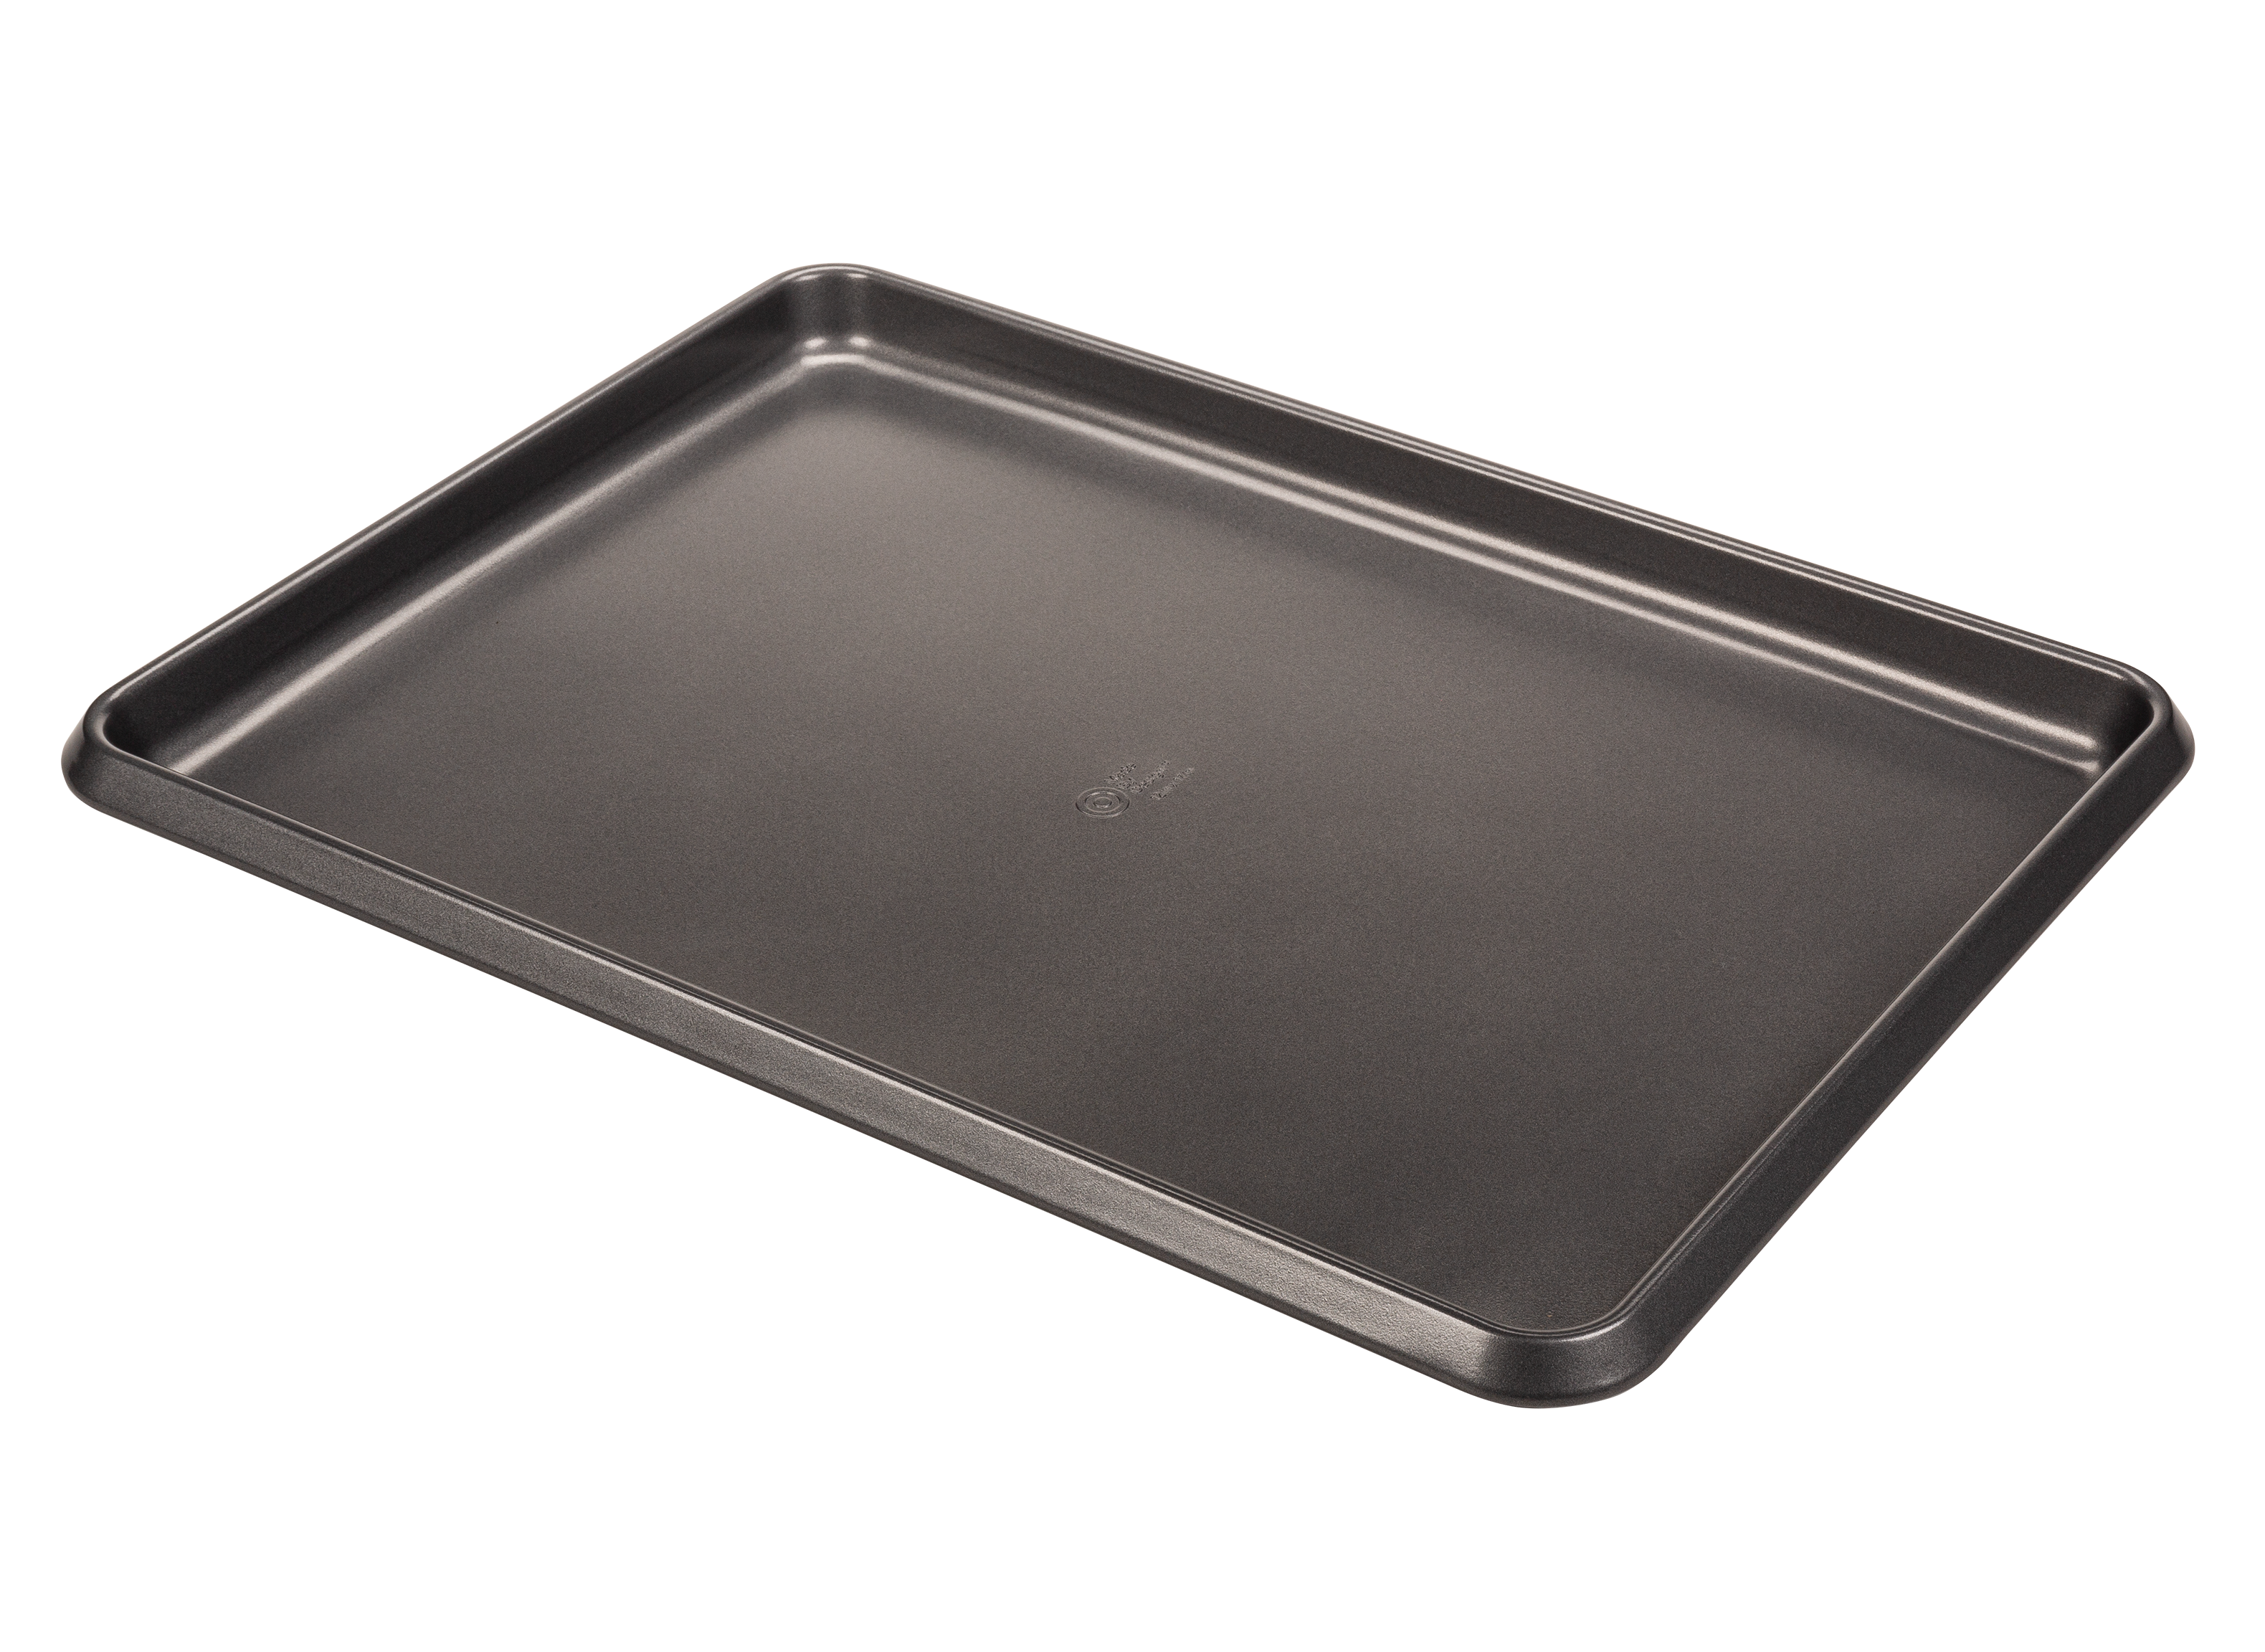 Made By Design (Target) Carbon Steel Non-Stick Jumbo Cookie Sheet Bakeware  Review - Consumer Reports